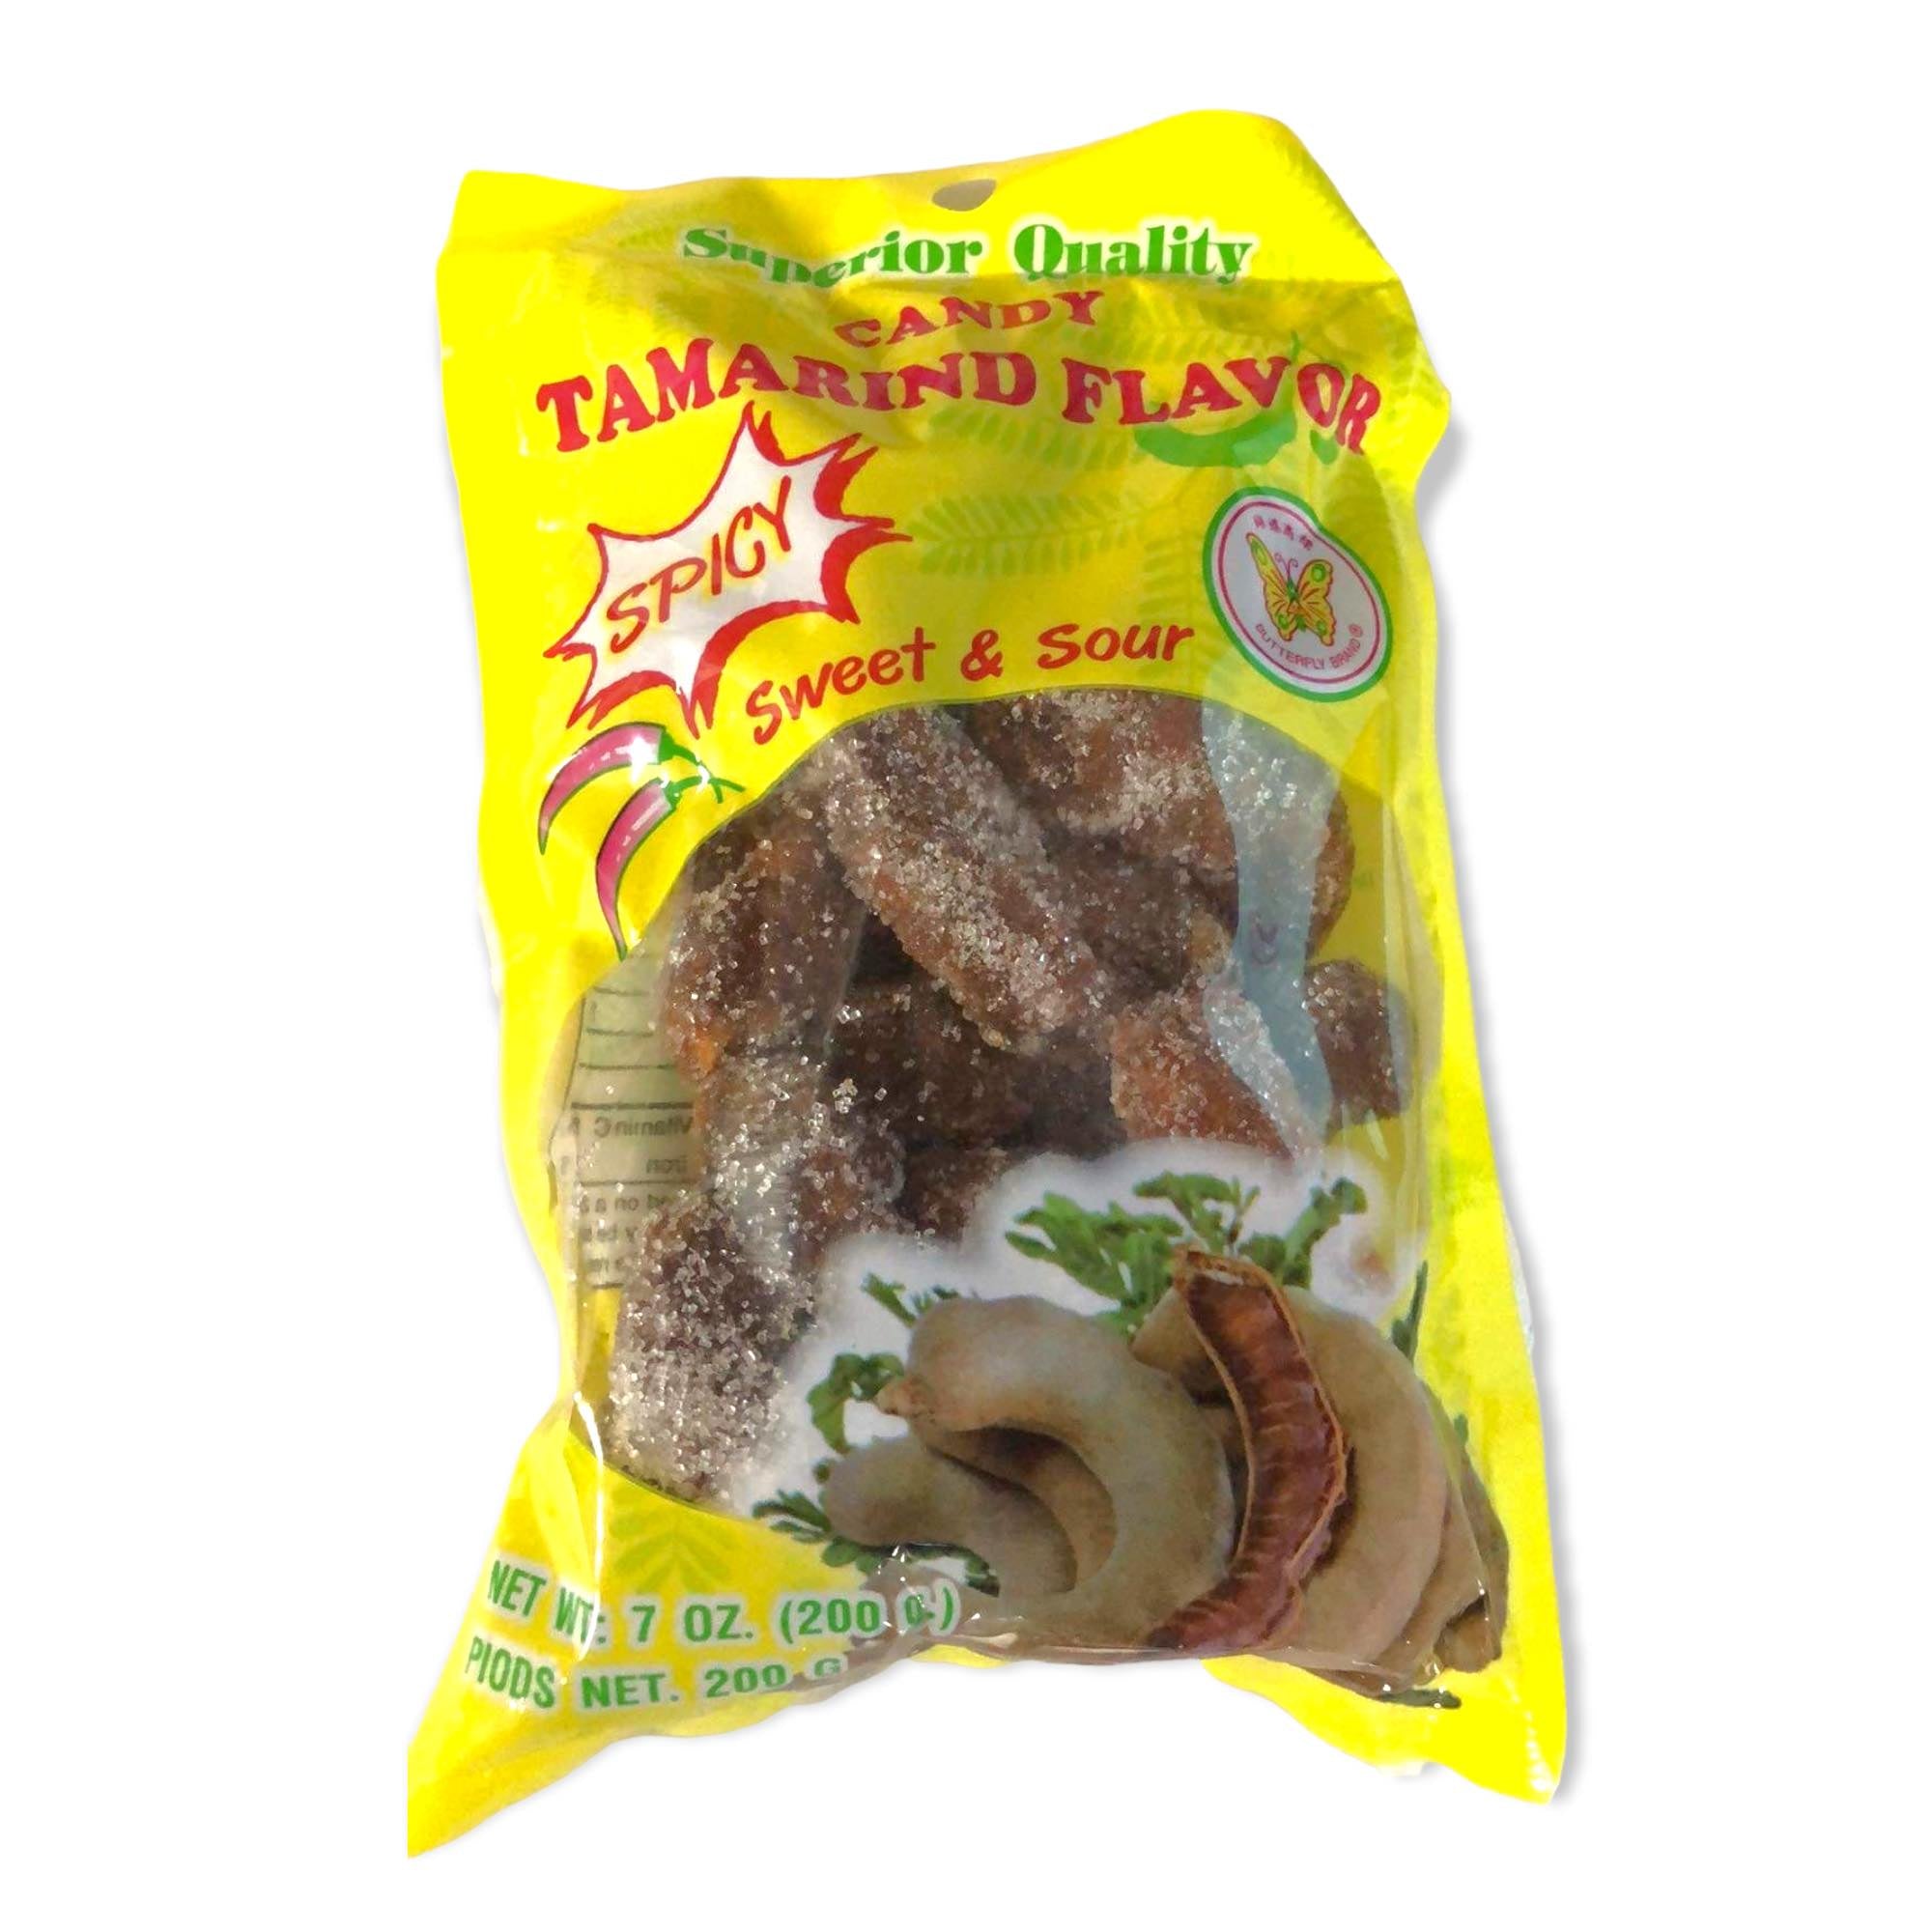 Butterfly Brand - Tamarind Flavor Candy - Sweet and Sour - Spicy - 200 G